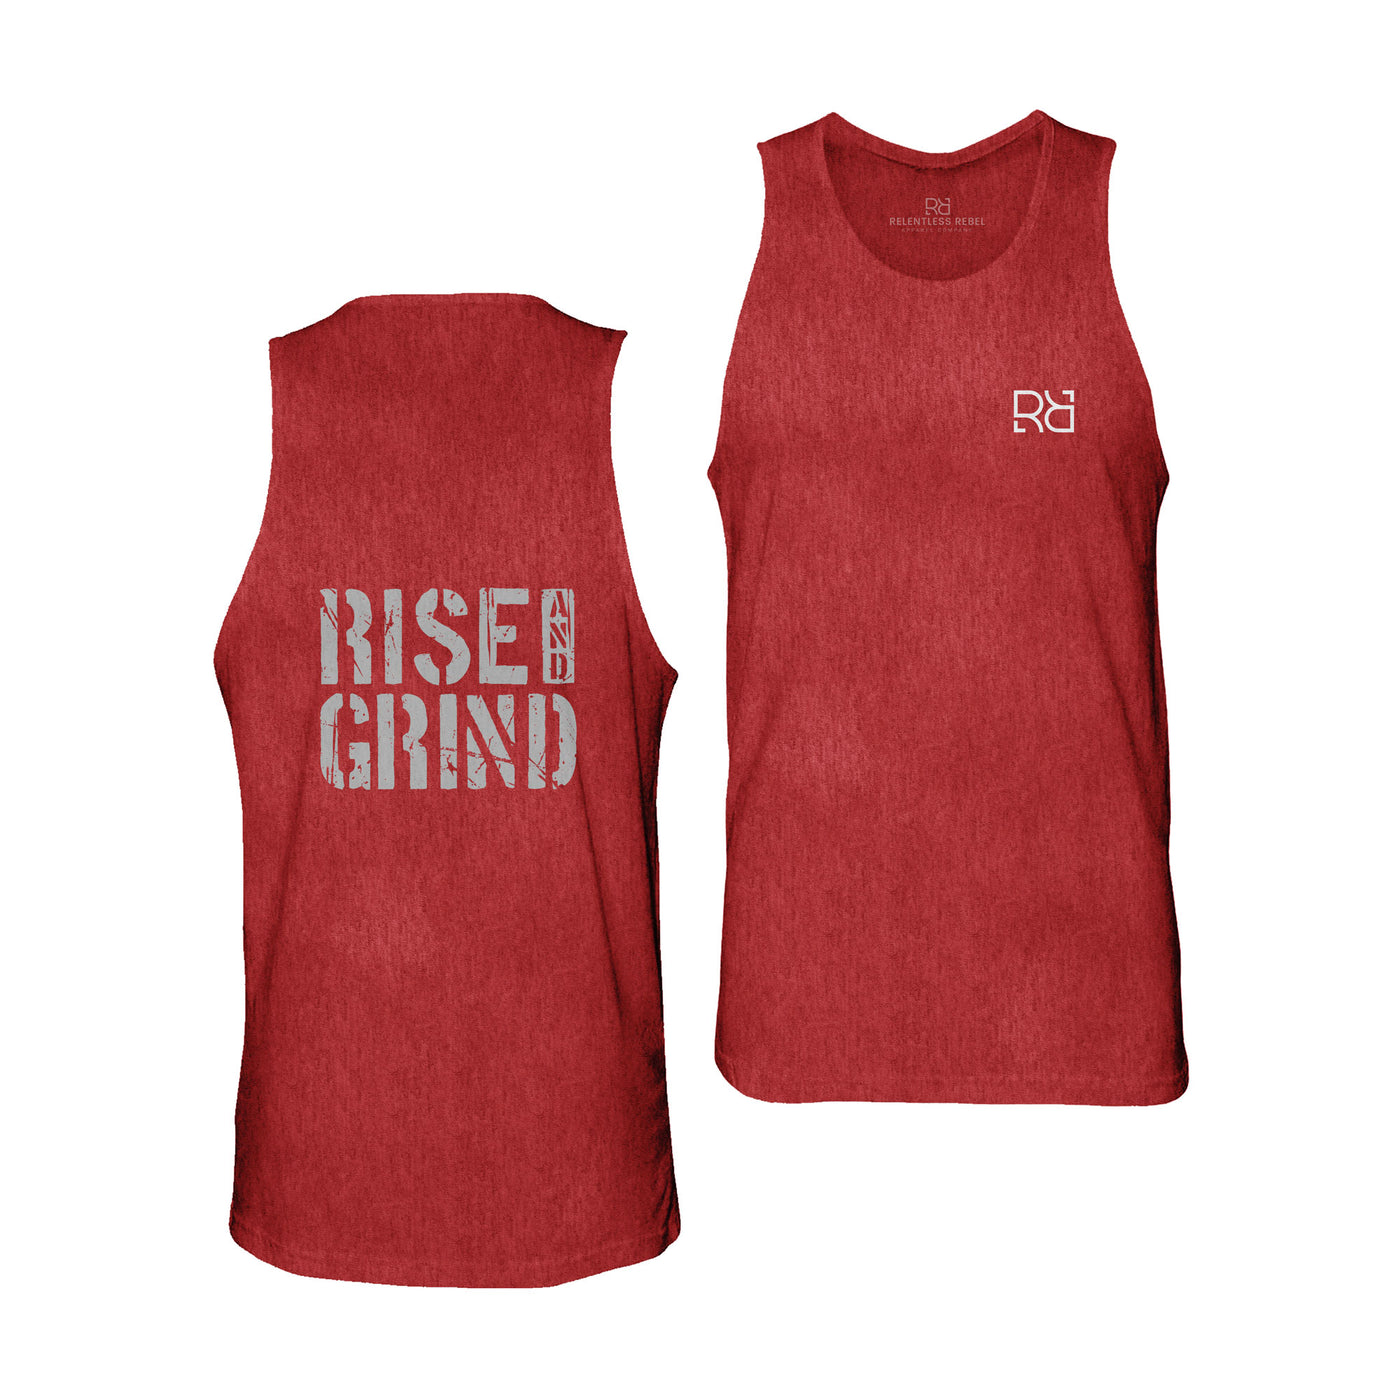 Rise and Grind | Red Triblend | Premium Men's Tank